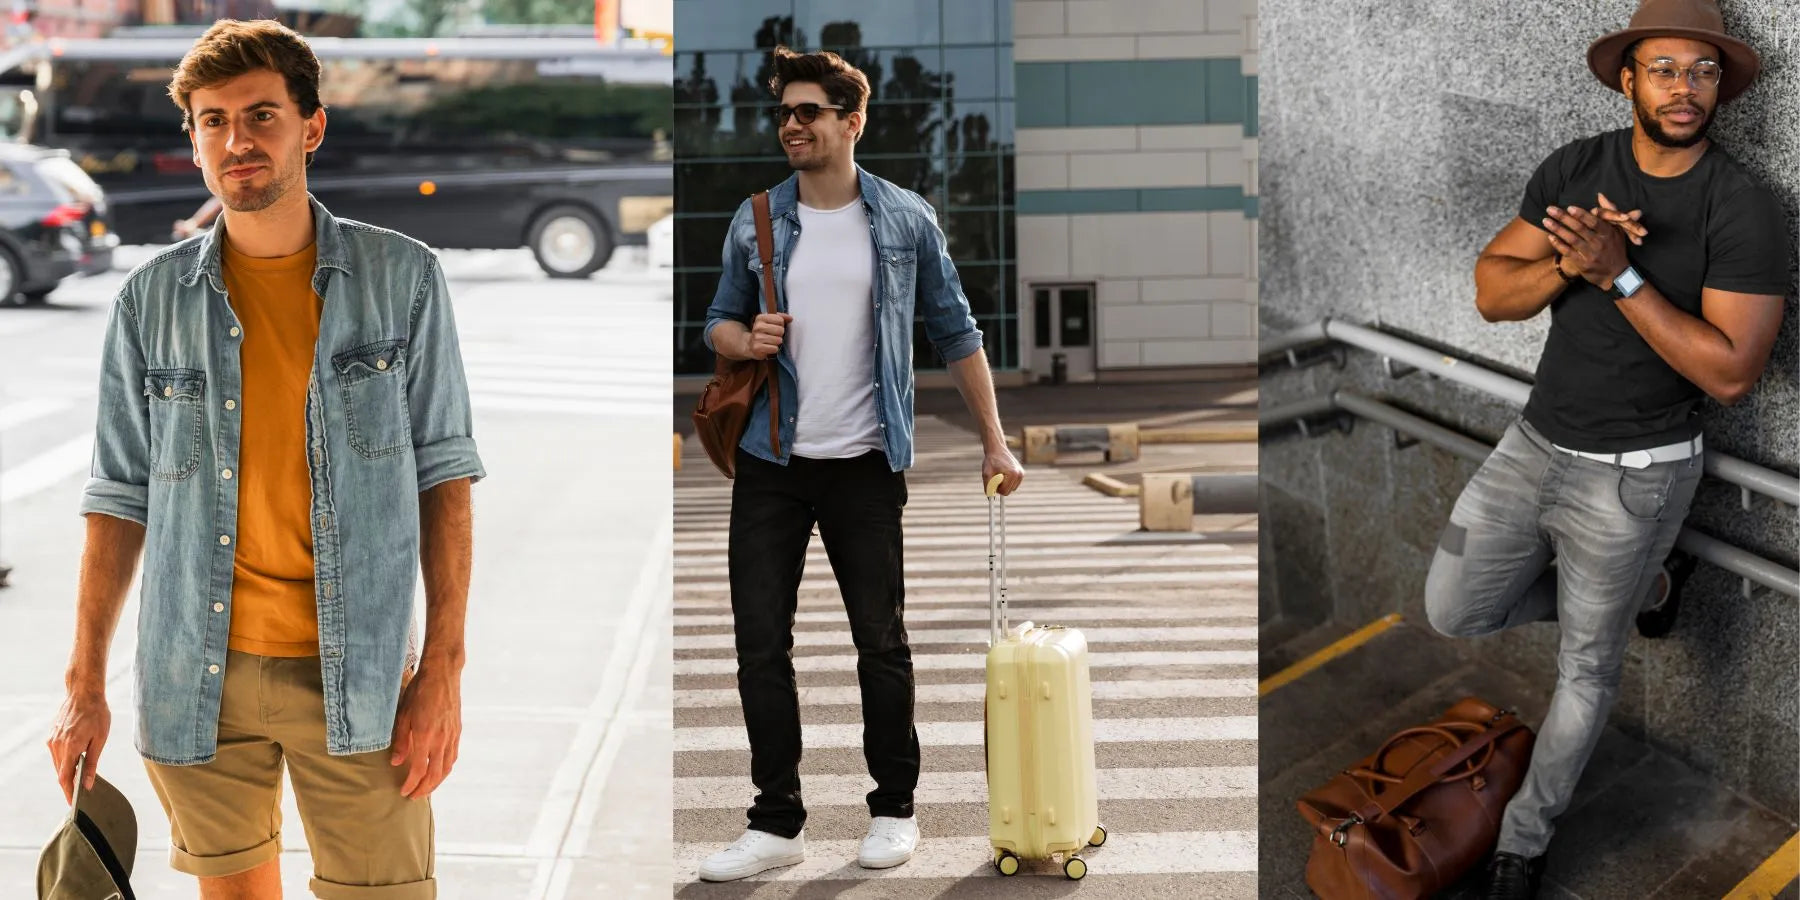 WHAT TO WEAR TO THE AIRPORT